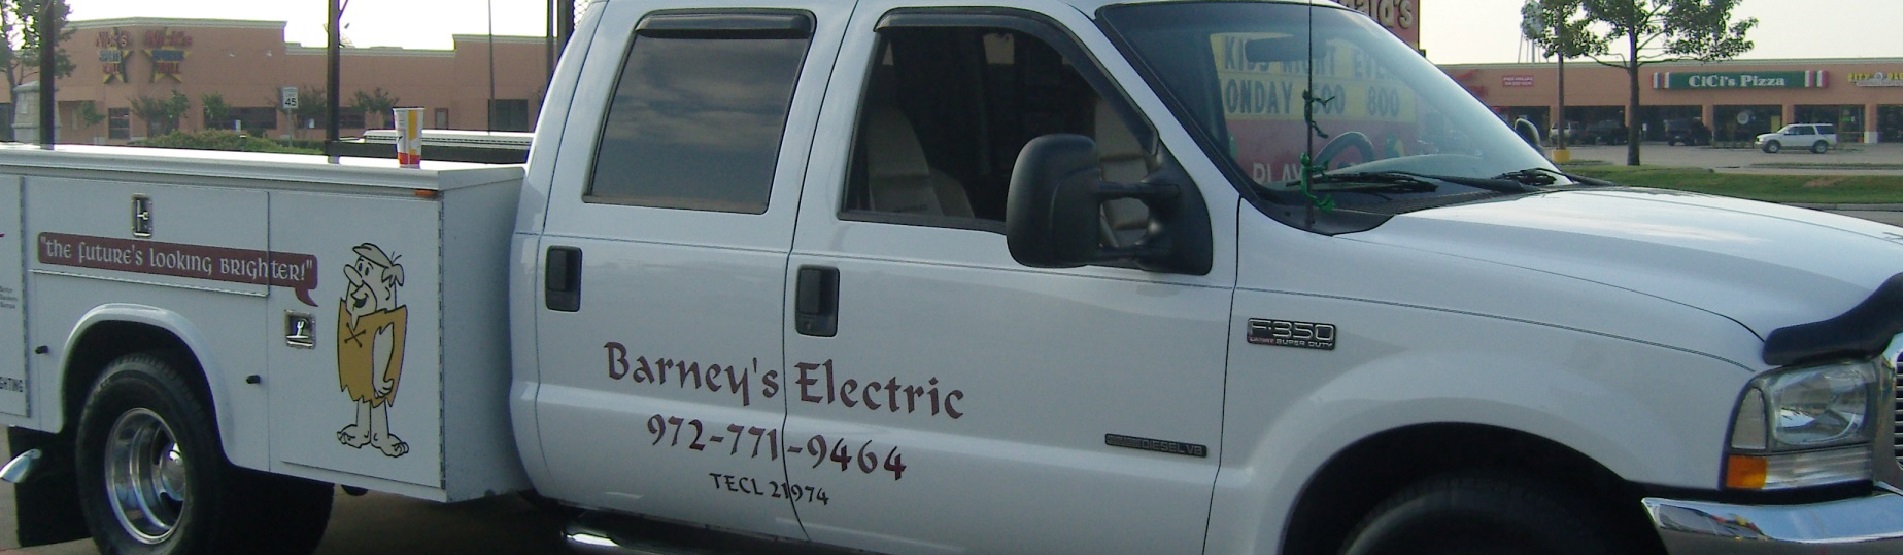 Electrician Murphy TX Barney's Electric Full Service Electrician Residential Commercial Retail and New Construction Wiring Repair Installation Service 24 Hour Emergency Services Master Electrician Rockwall Texas